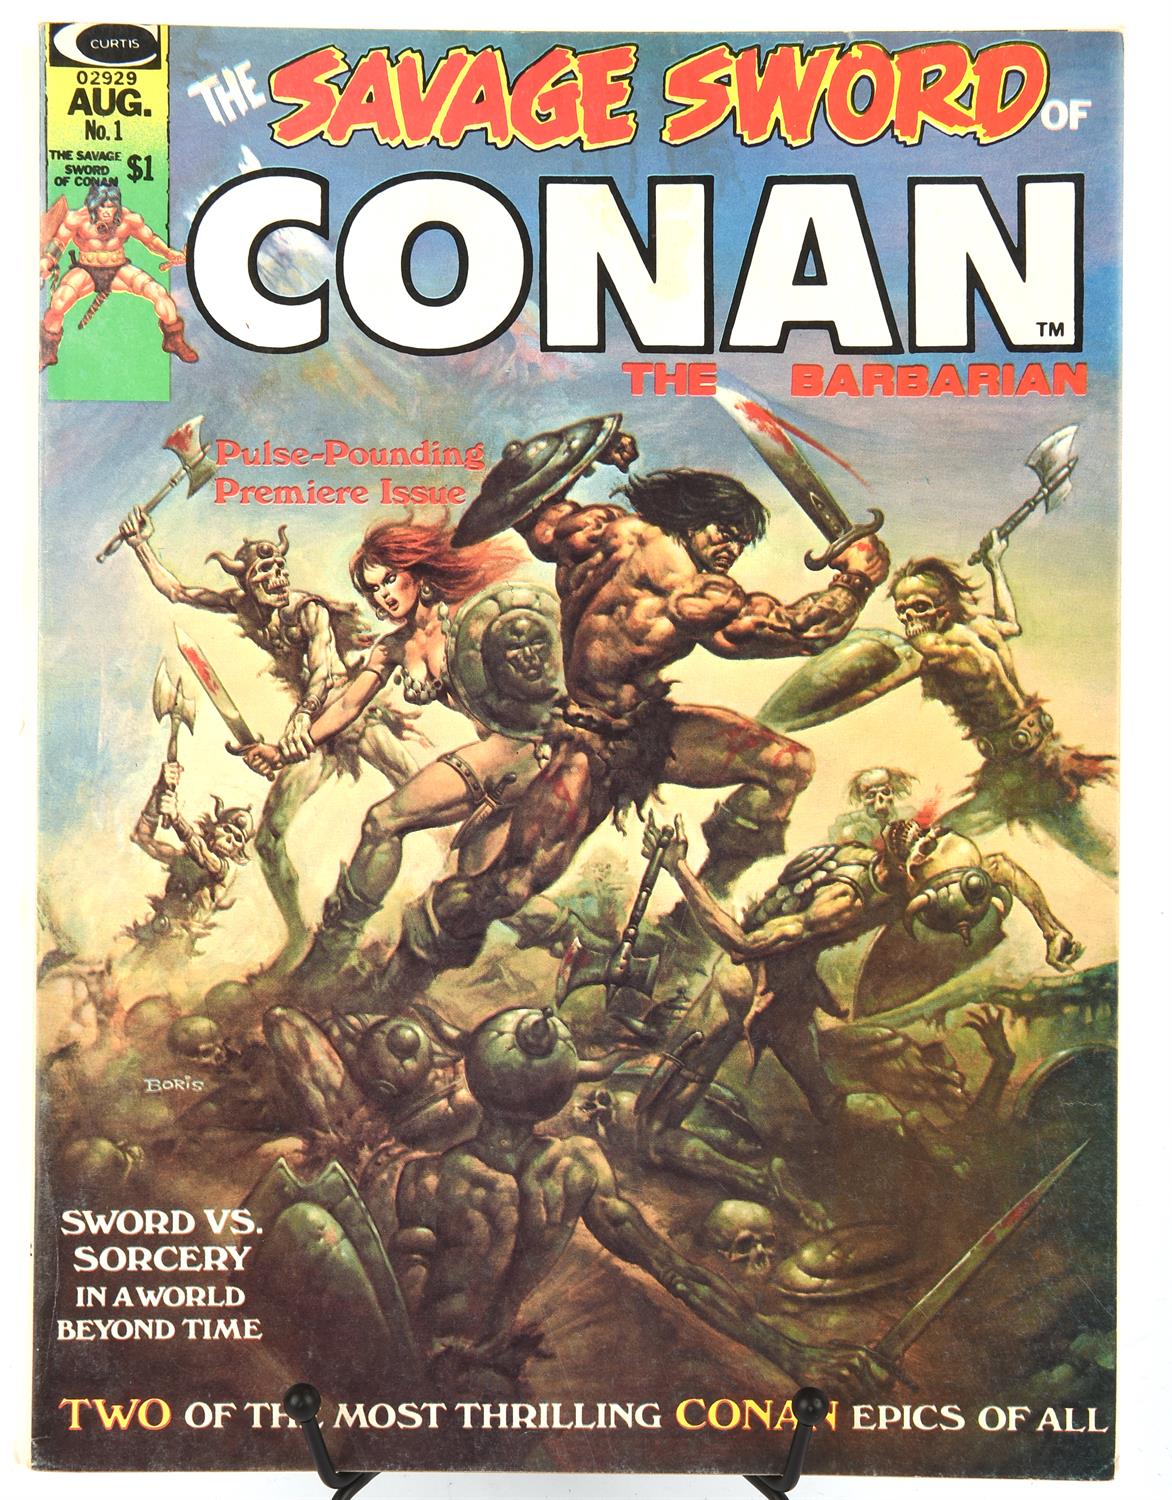 Marvel Comics: The Savage Sword of Conan the Barbarian US edition (1974). The 1st issue of the